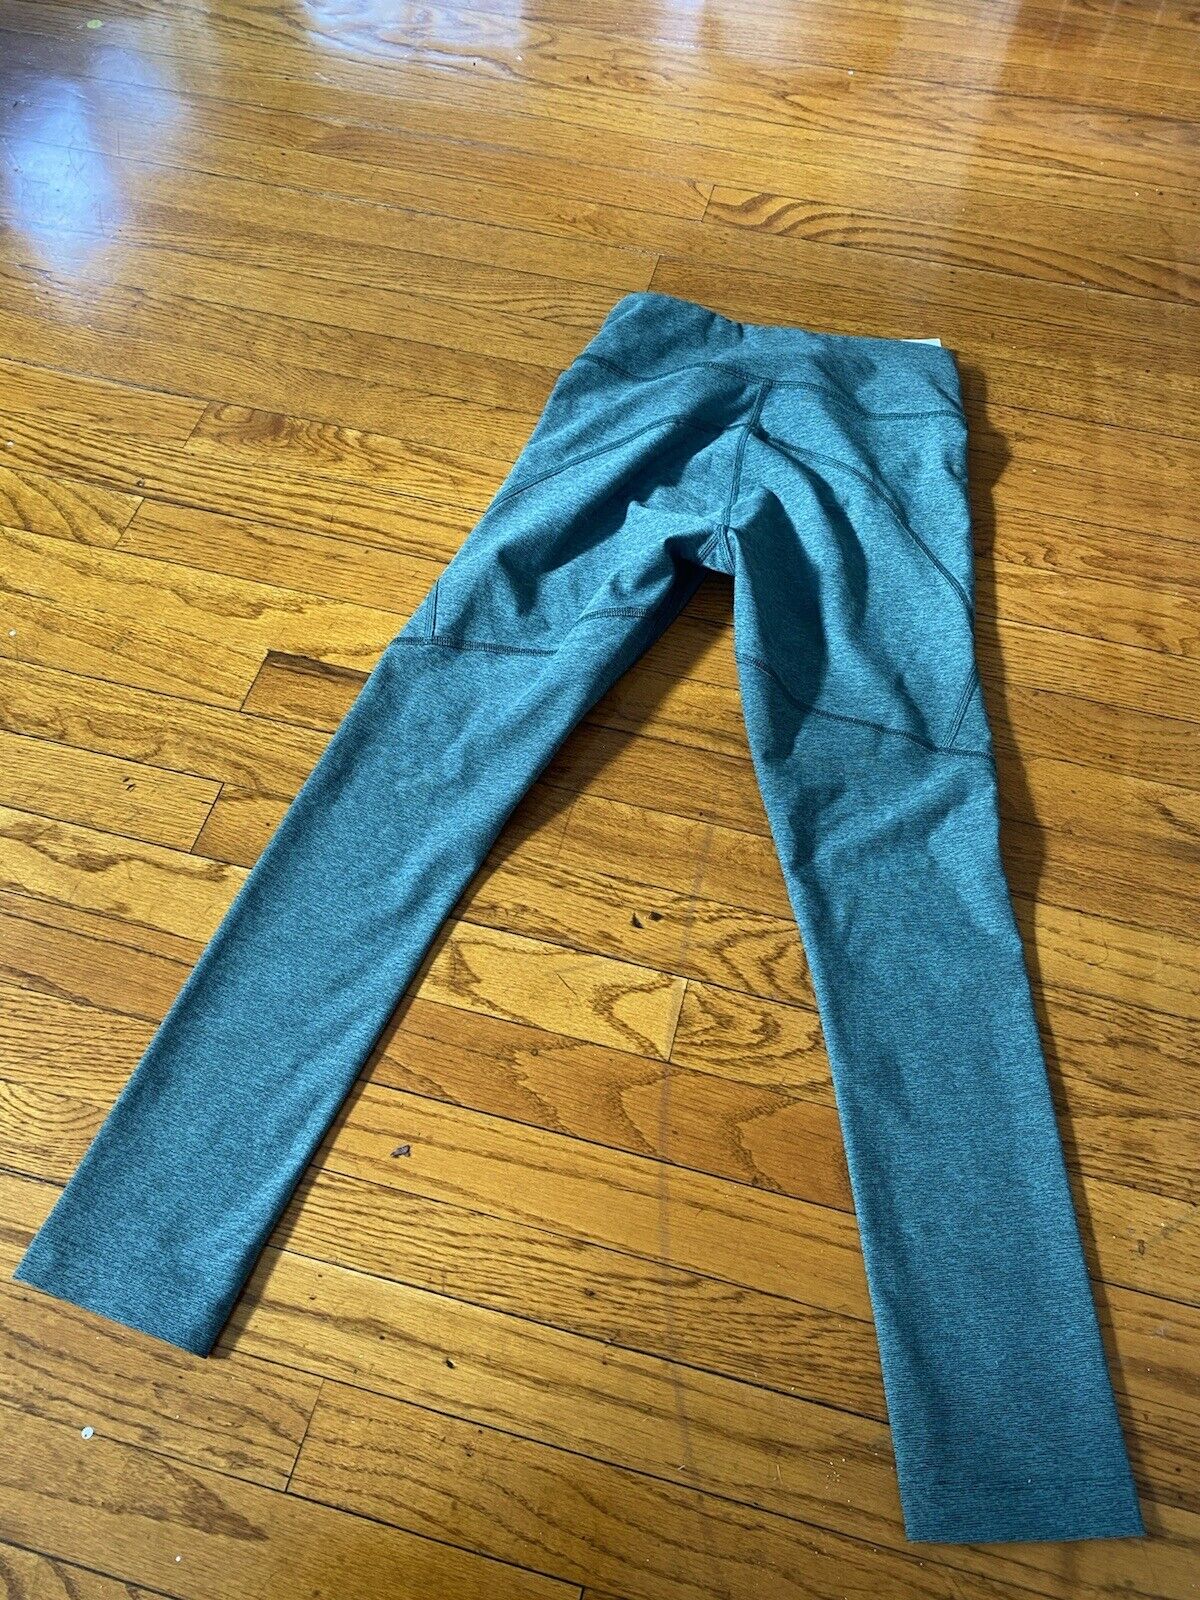 Outdoor Voices Warm-Up 3/4 Leggings NWT $78 Women XS Hunter Green Running Yoga